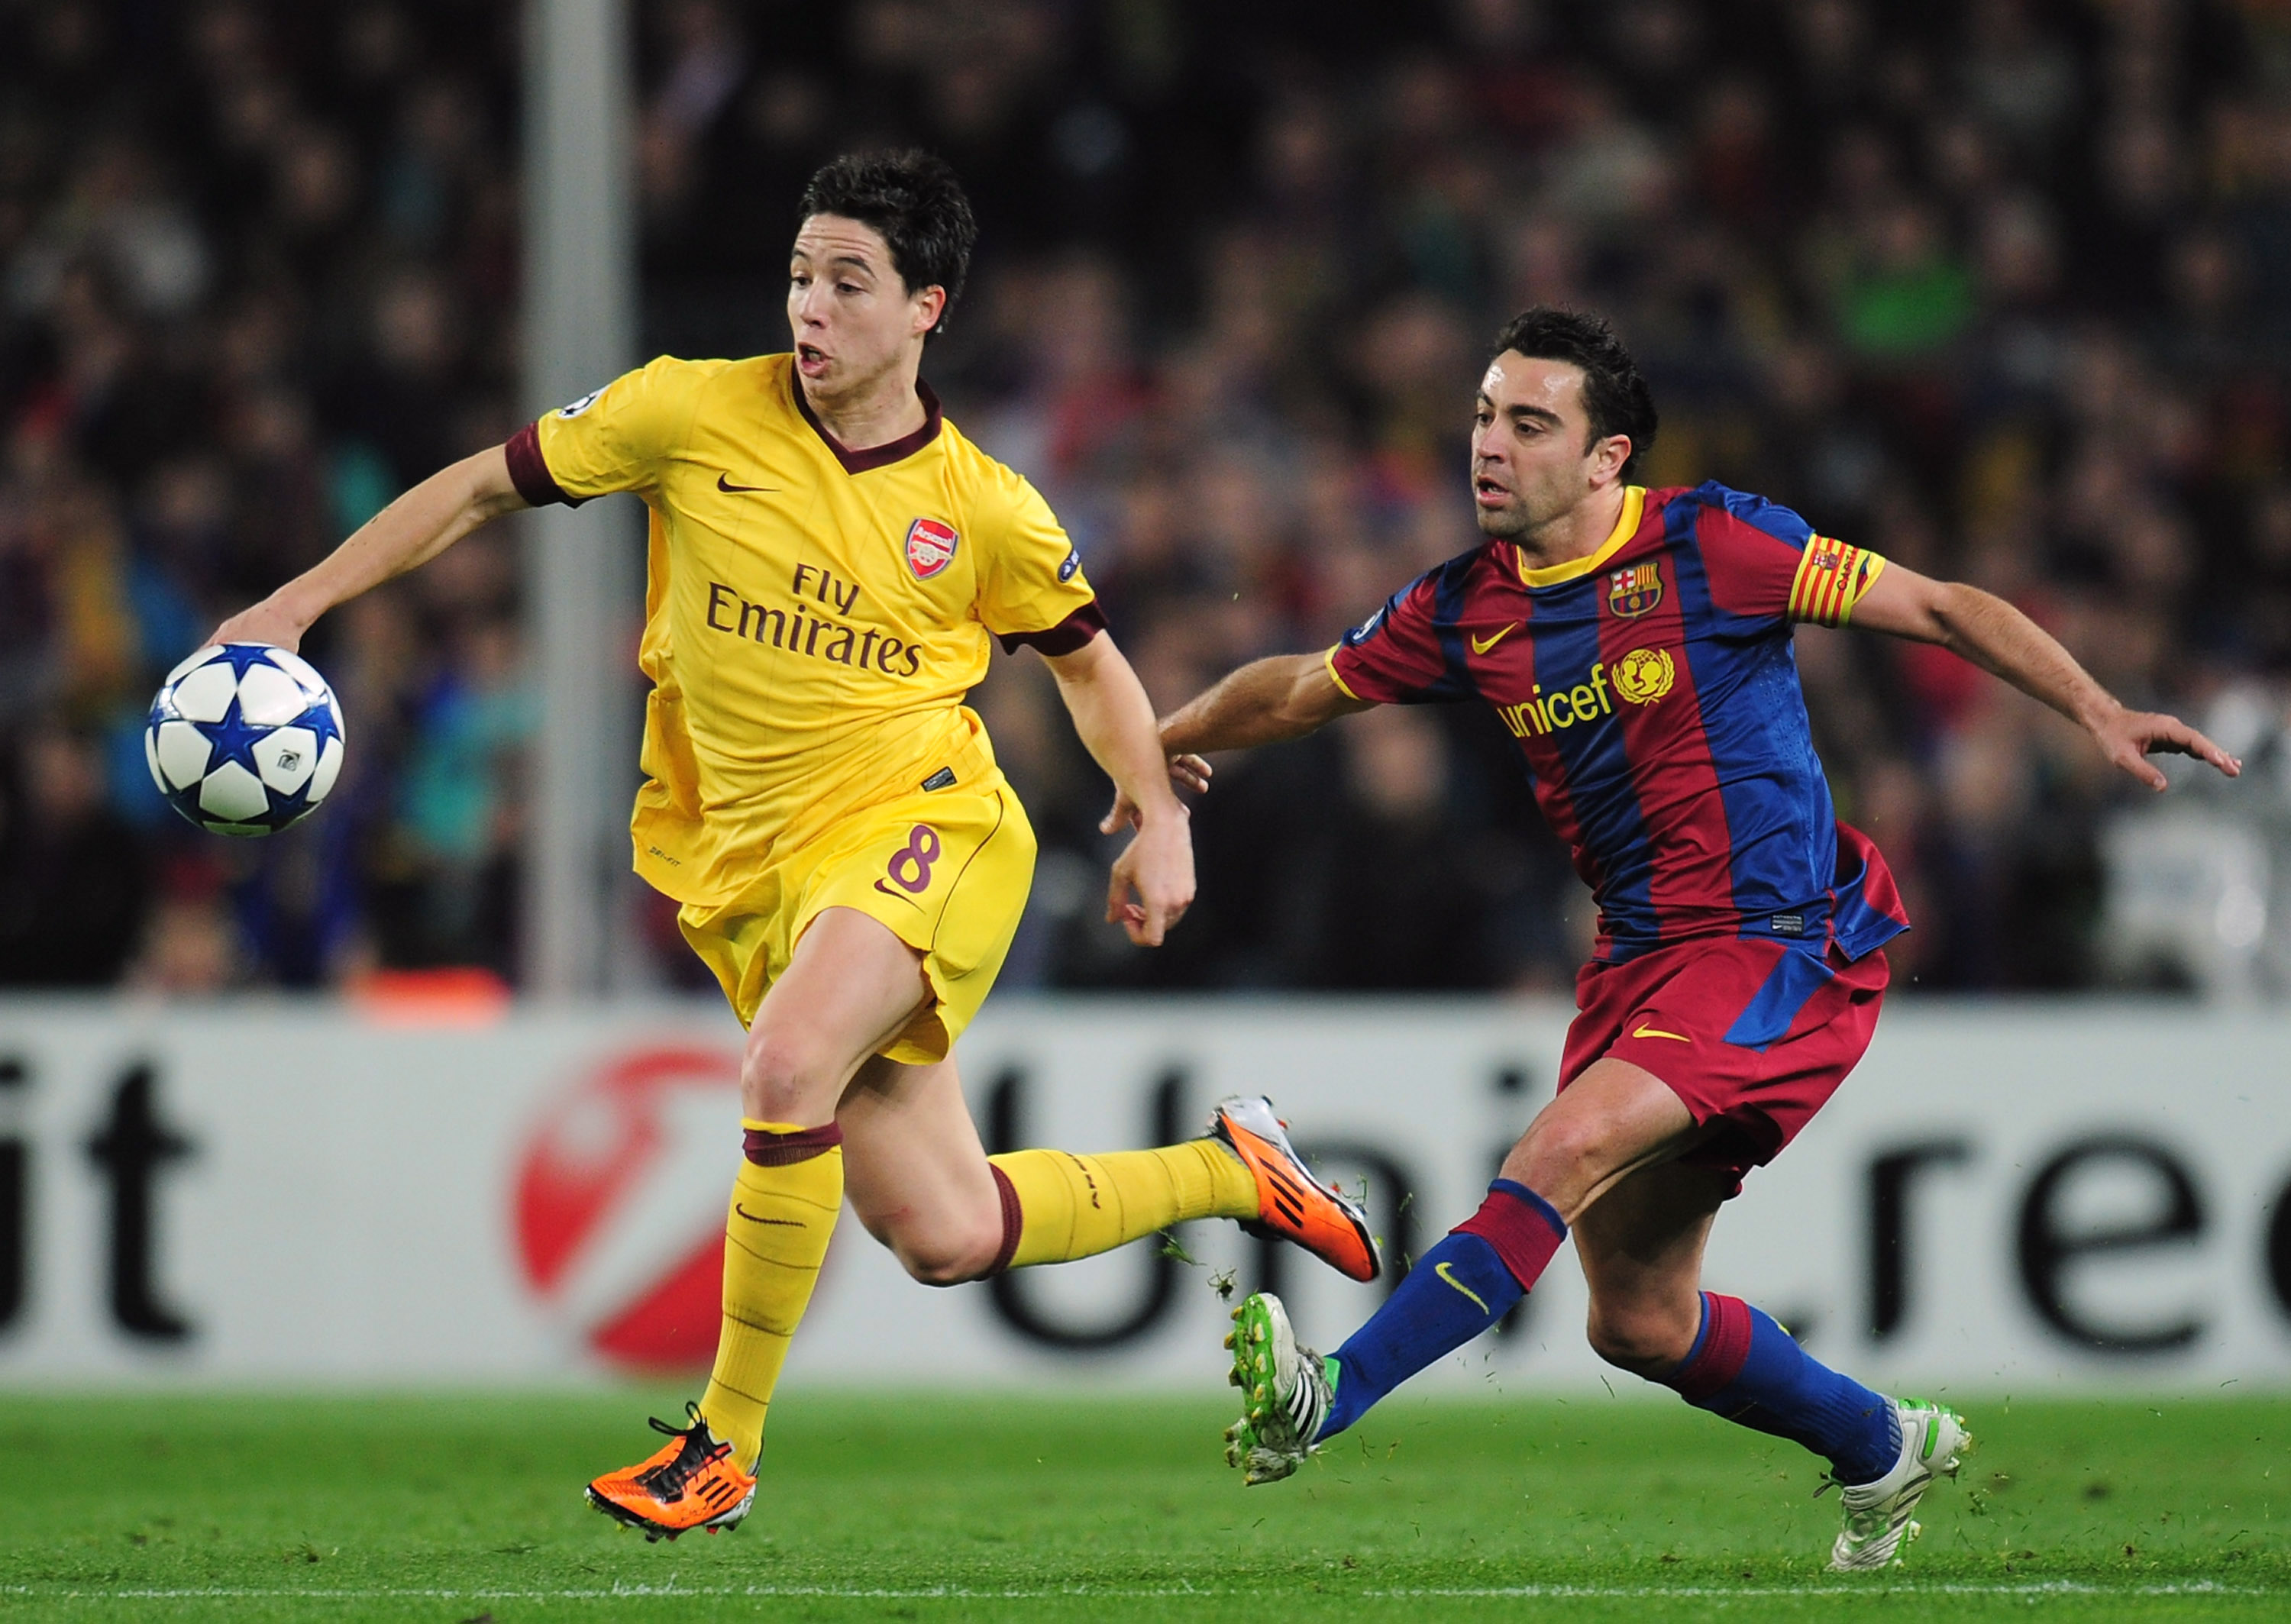 BARCELONA, SPAIN - MARCH 08:   Samir Nasri (L) of Arsenal is challenged by Xavi Hernandez of Barcelona during the UEFA Champions League round of 16 second leg match between Barcelona and Arsenal at the Nou Camp Stadium on March 8, 2011 in Barcelona, Spain